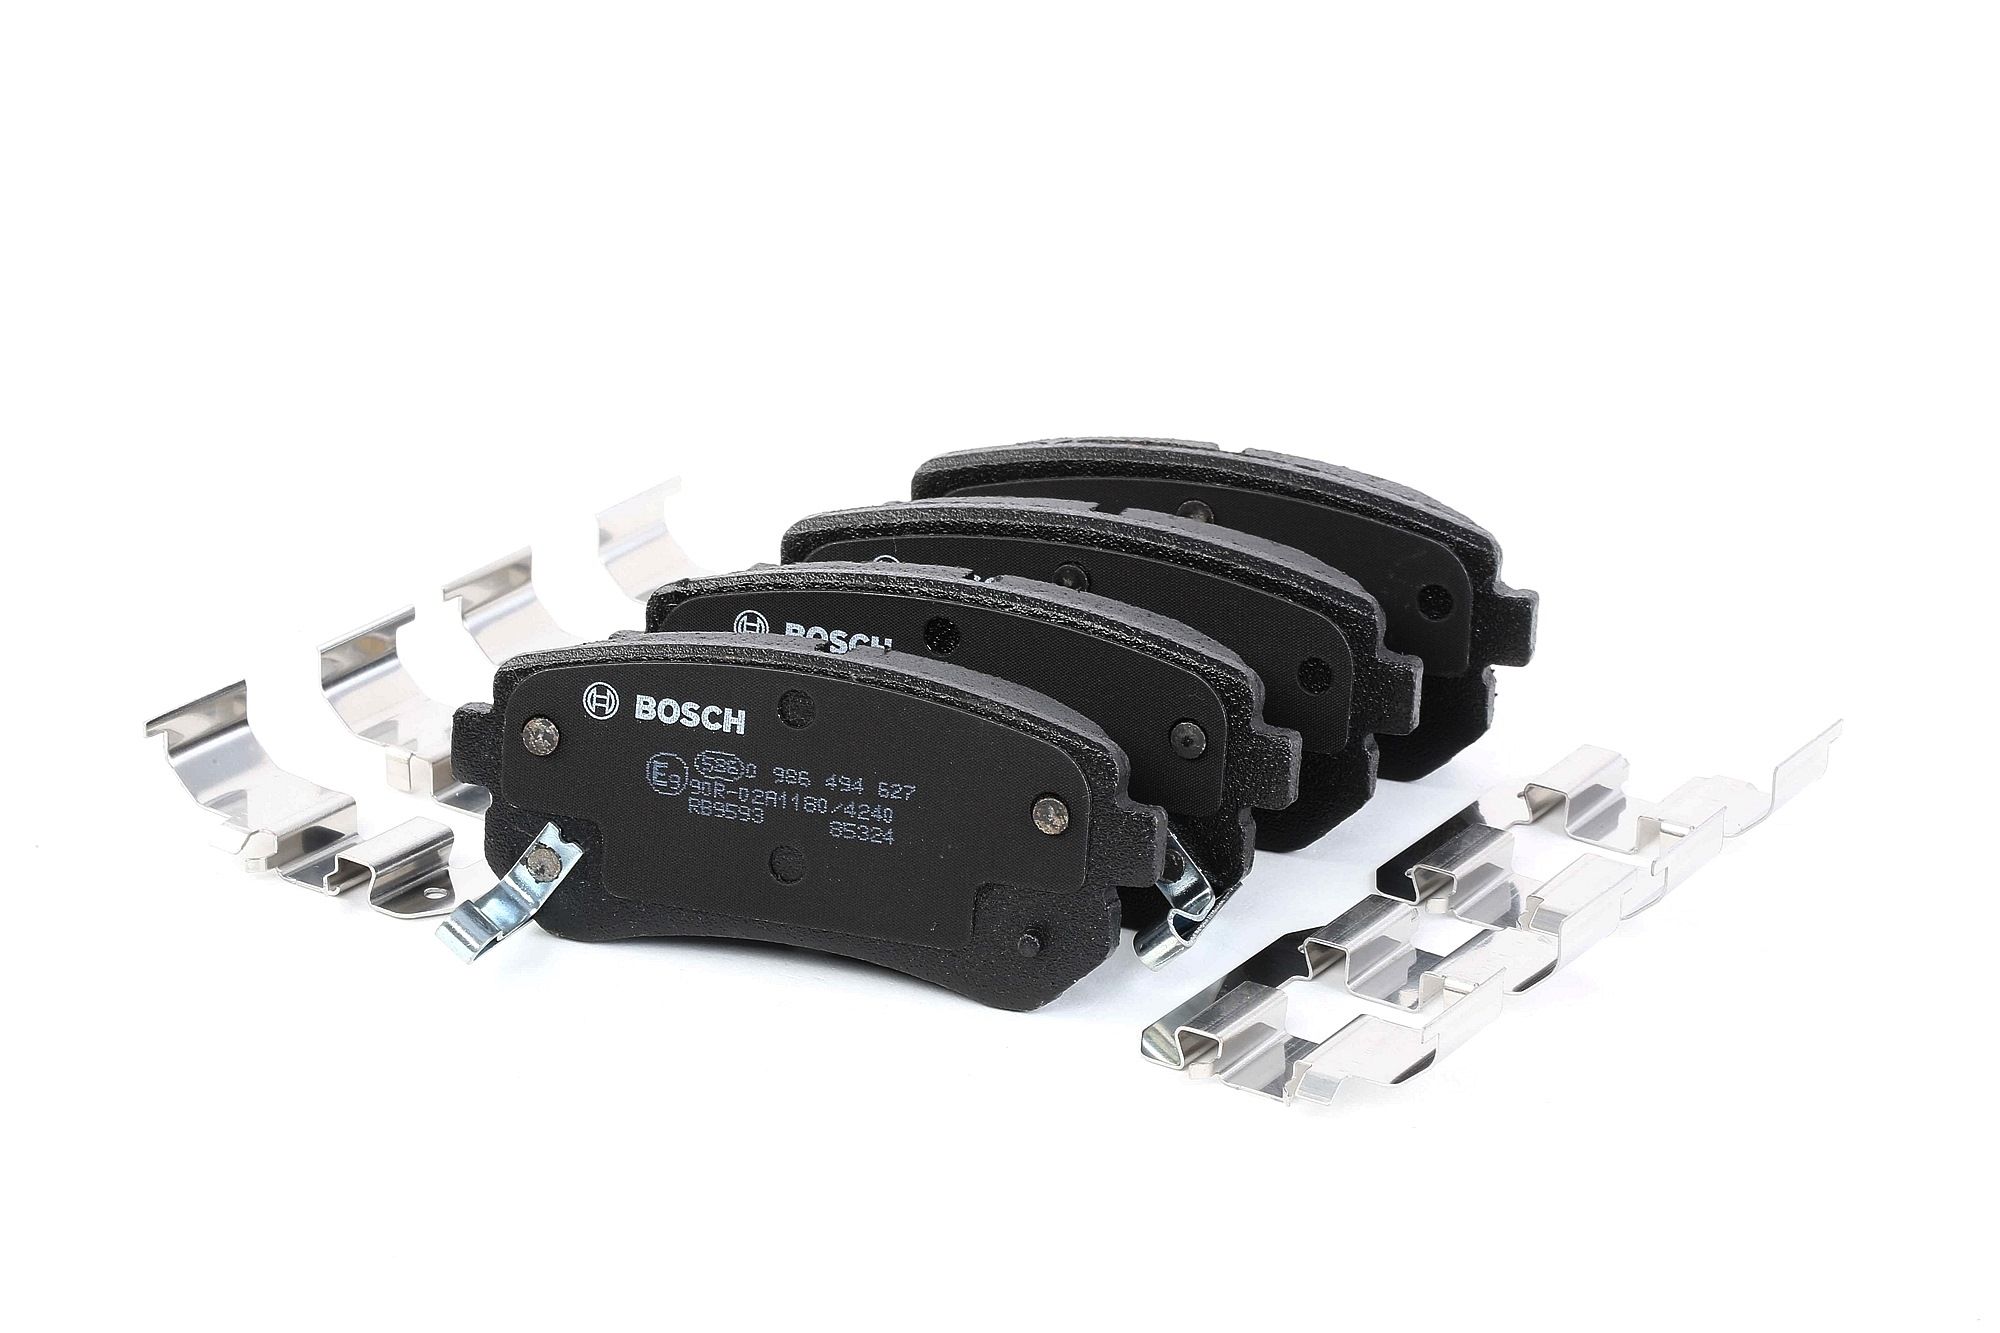 BOSCH 0 986 494 627 Brake pad set Low-Metallic, with acoustic wear warning, with anti-squeak plate, with mounting manual